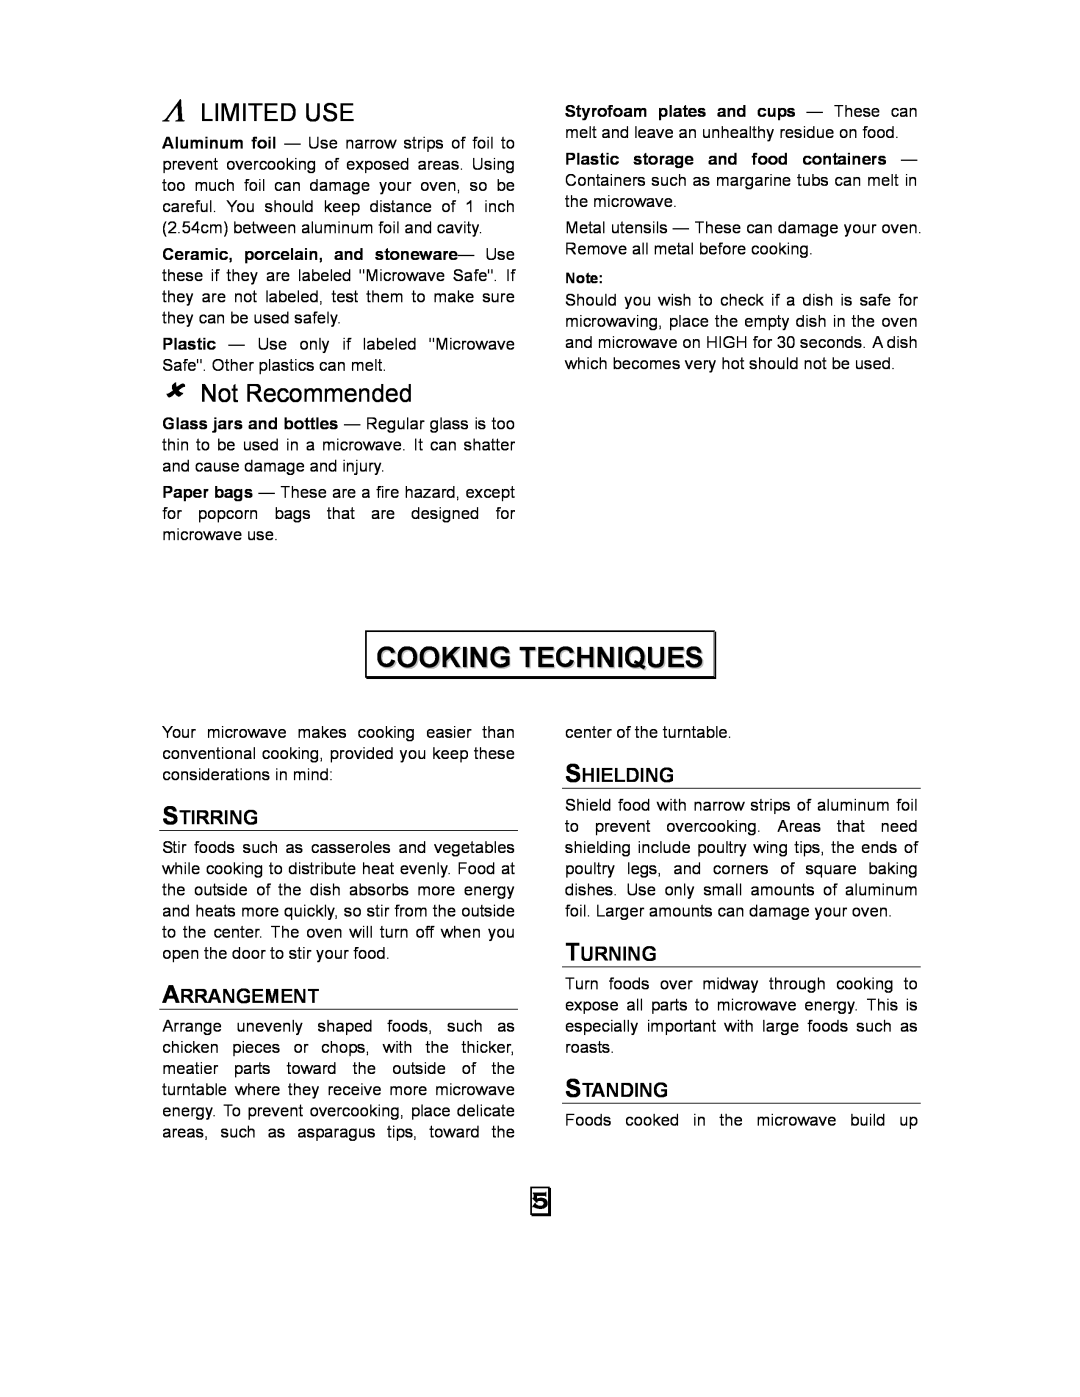 Kenmore 87043 Cooking Techniques, Λ Limited Use, Not Recommended, Stirring, Arrangement, Shielding, Turning, Standing 